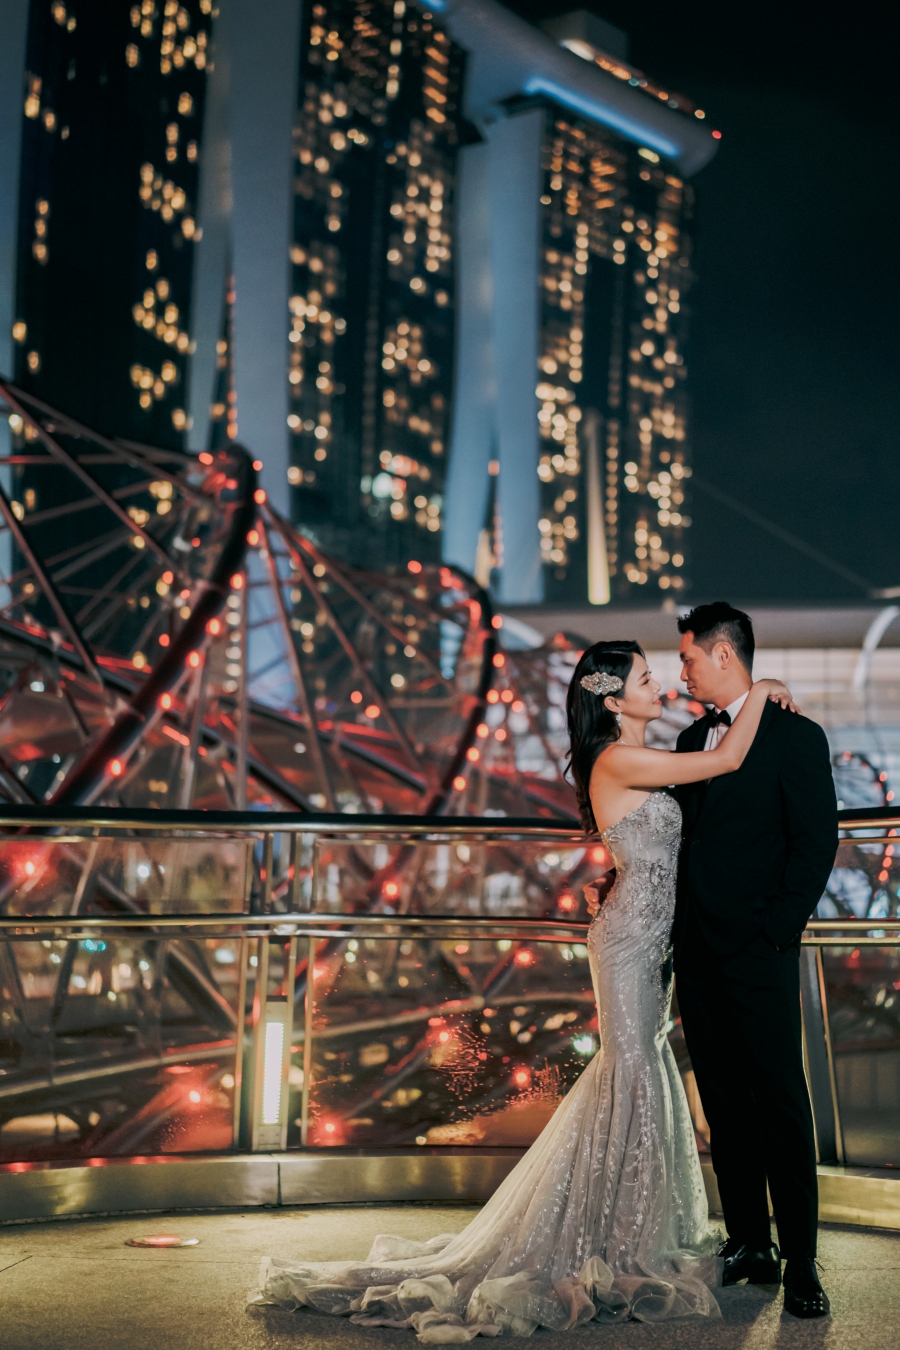 Singapore Pre-Wedding Photoshoot At Cloud Forest, Fort Canning Spiral Staircase And Marina Bay For Korean Couple  by Michael  on OneThreeOneFour 11